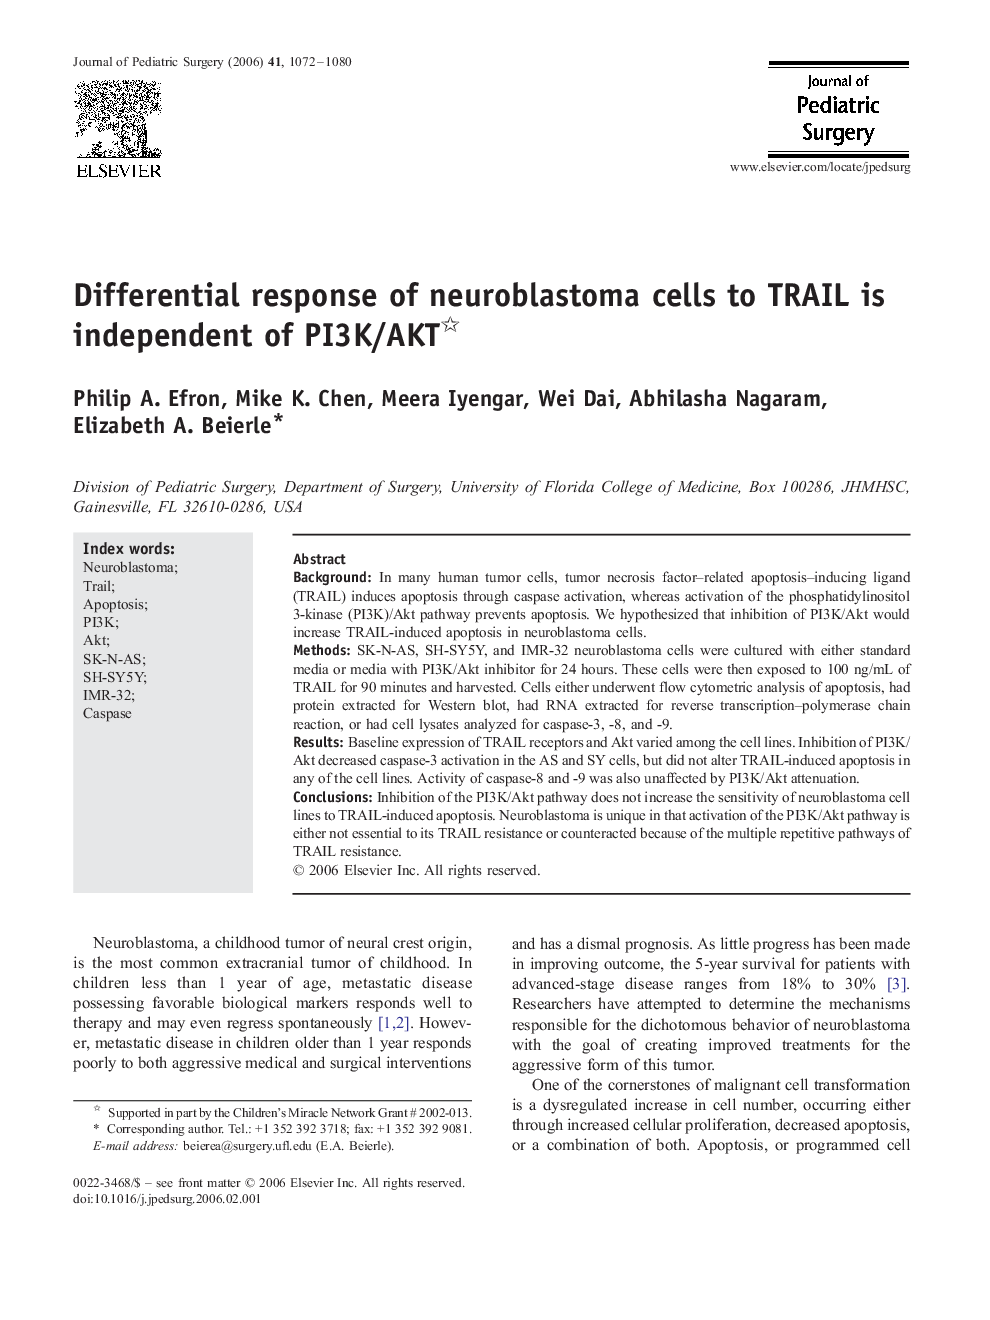 Differential response of neuroblastoma cells to TRAIL is independent of PI3K/AKT